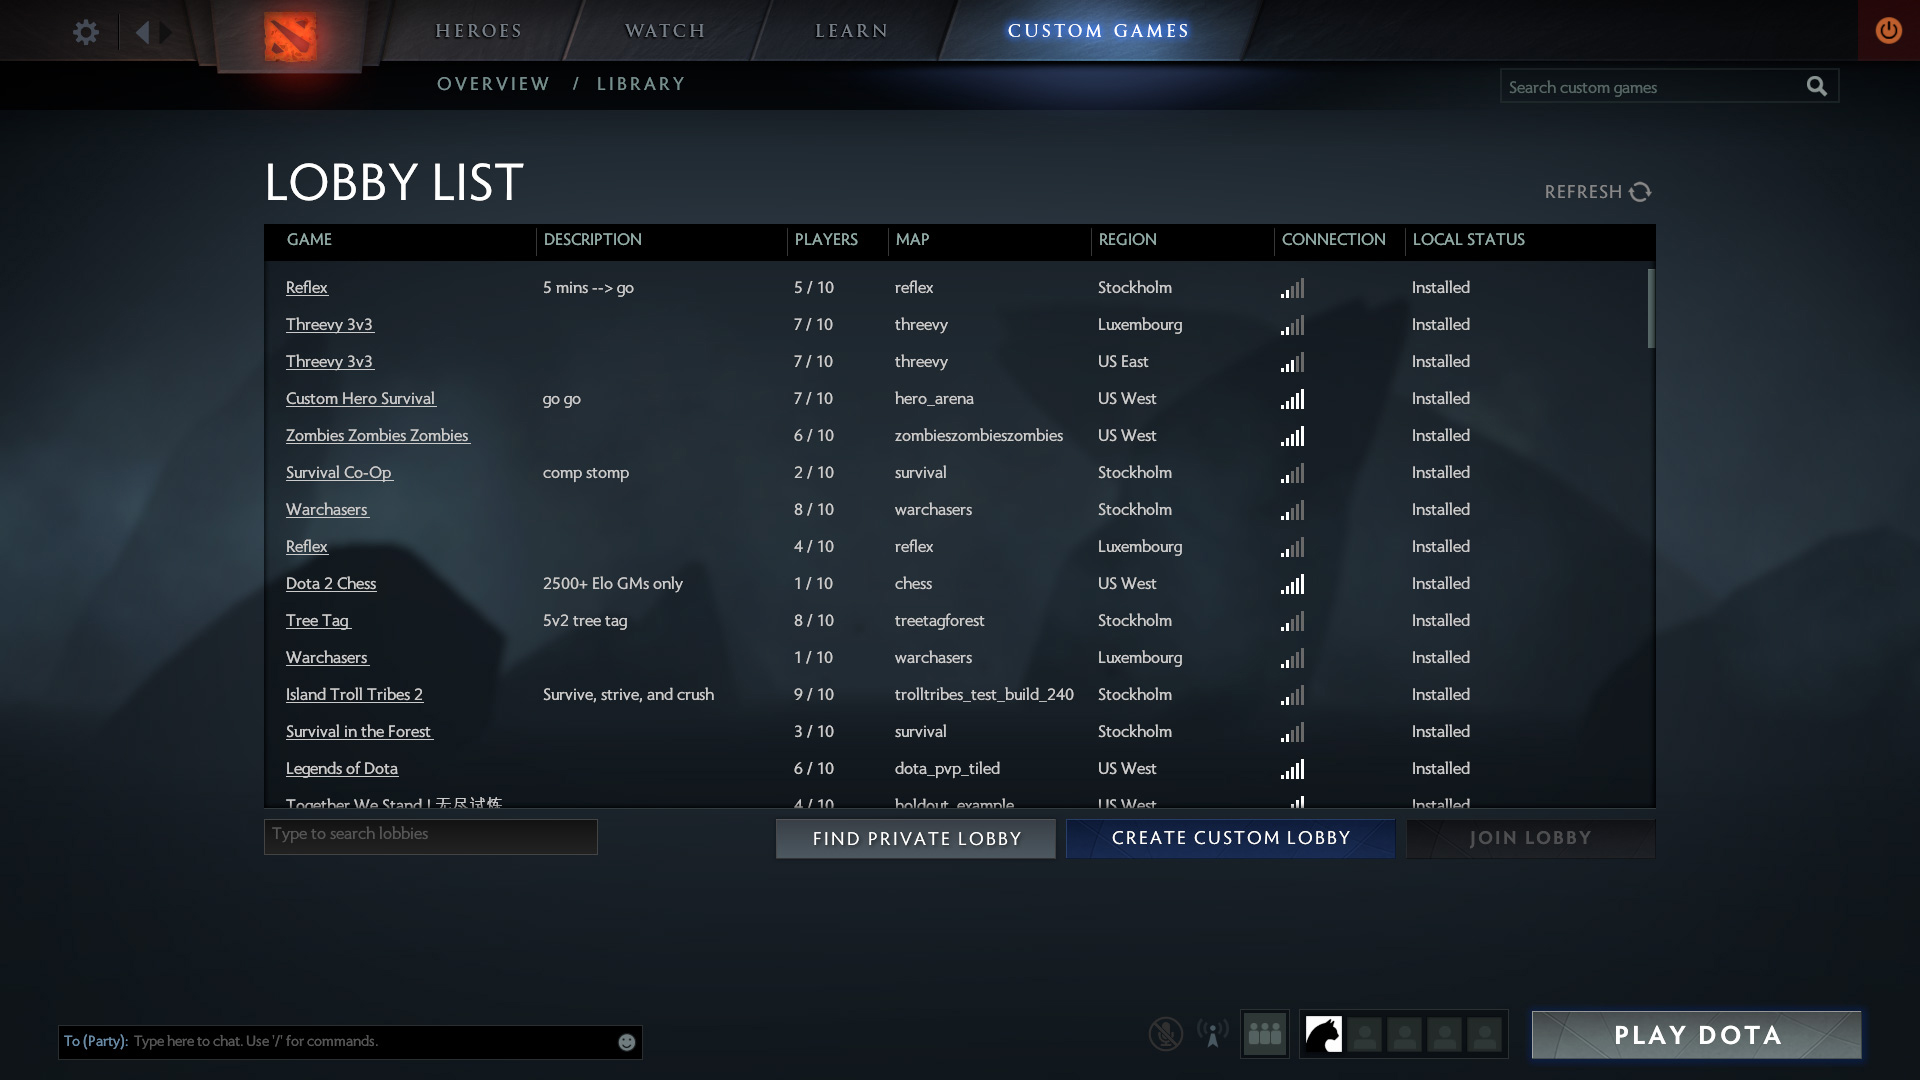 Lobbylist proper.. Tho I knida enjoy the neat screenshot/info page that current arcade provides too. Valve plz steal.